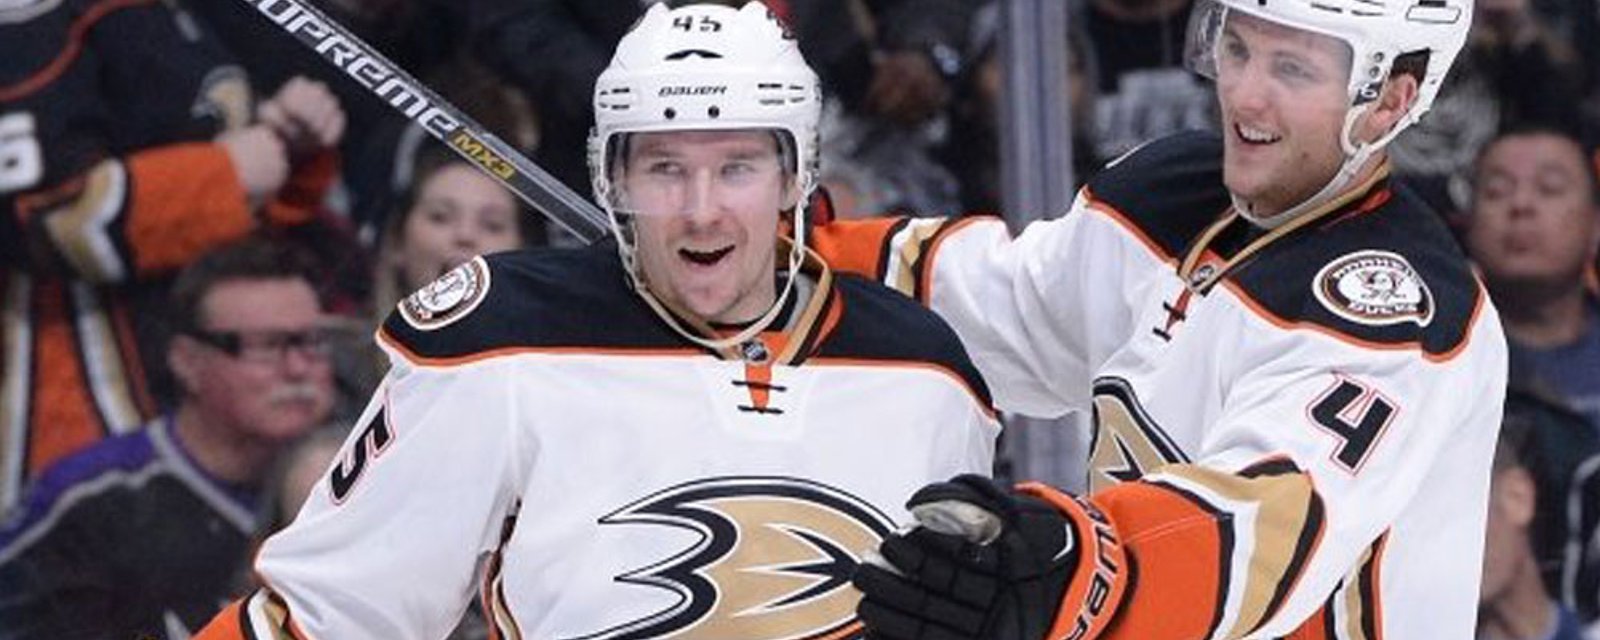 Rumor: Ducks top D-man shipped out to Canadian team?